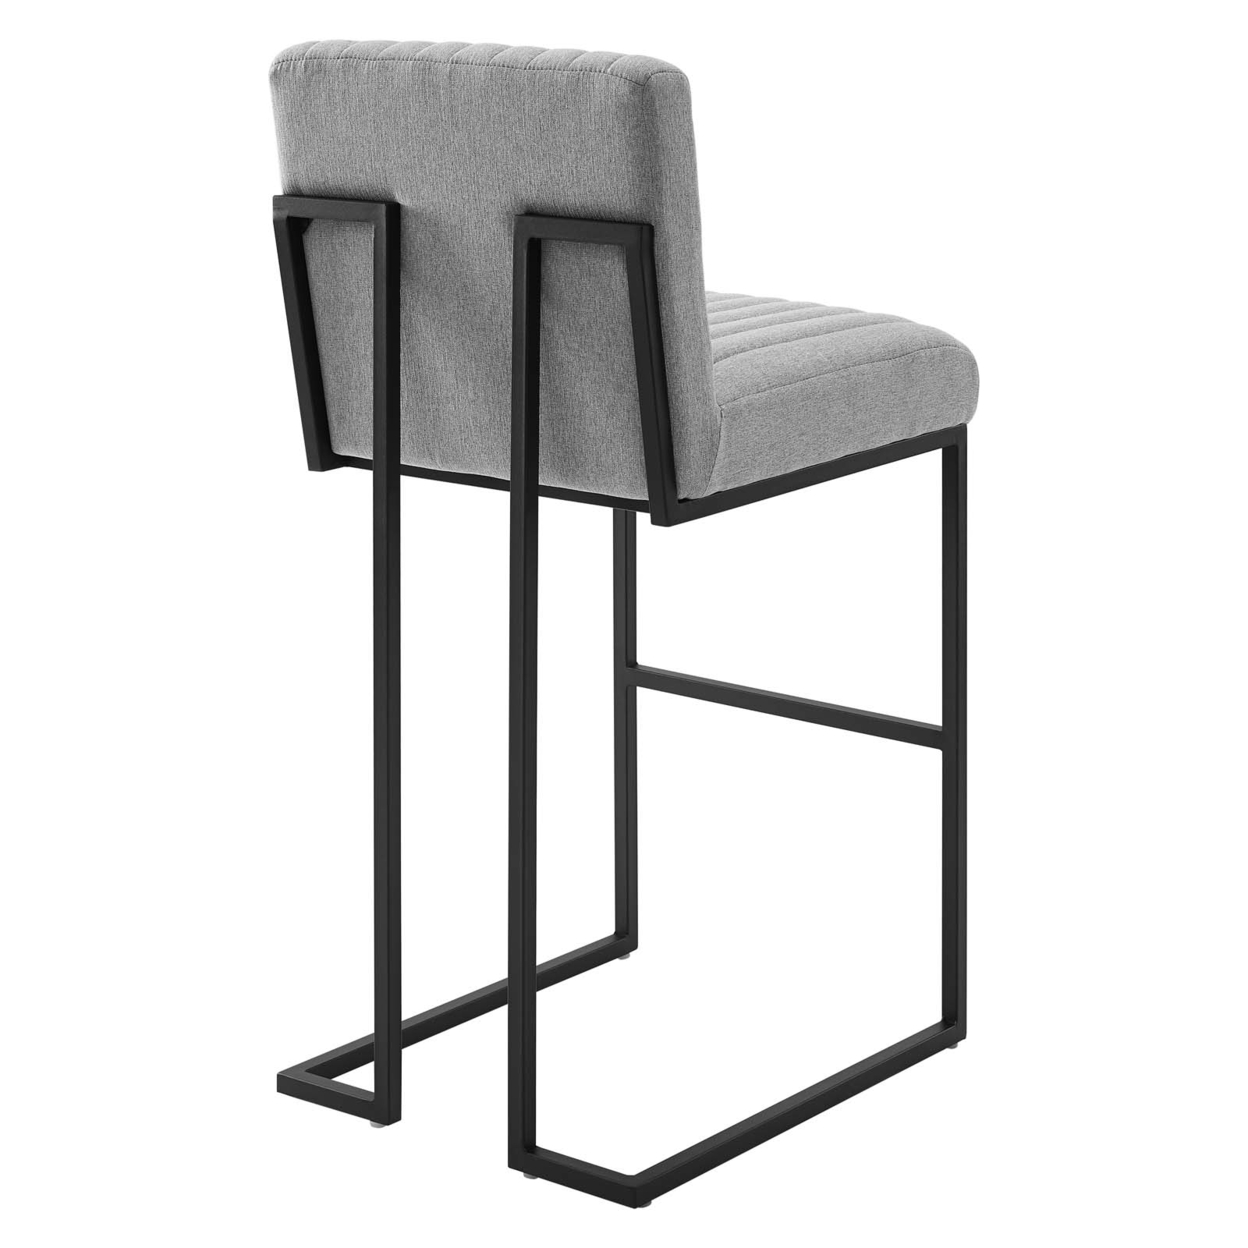 Indulge Channel Tufted Fabric Bar Stool, Light Gray